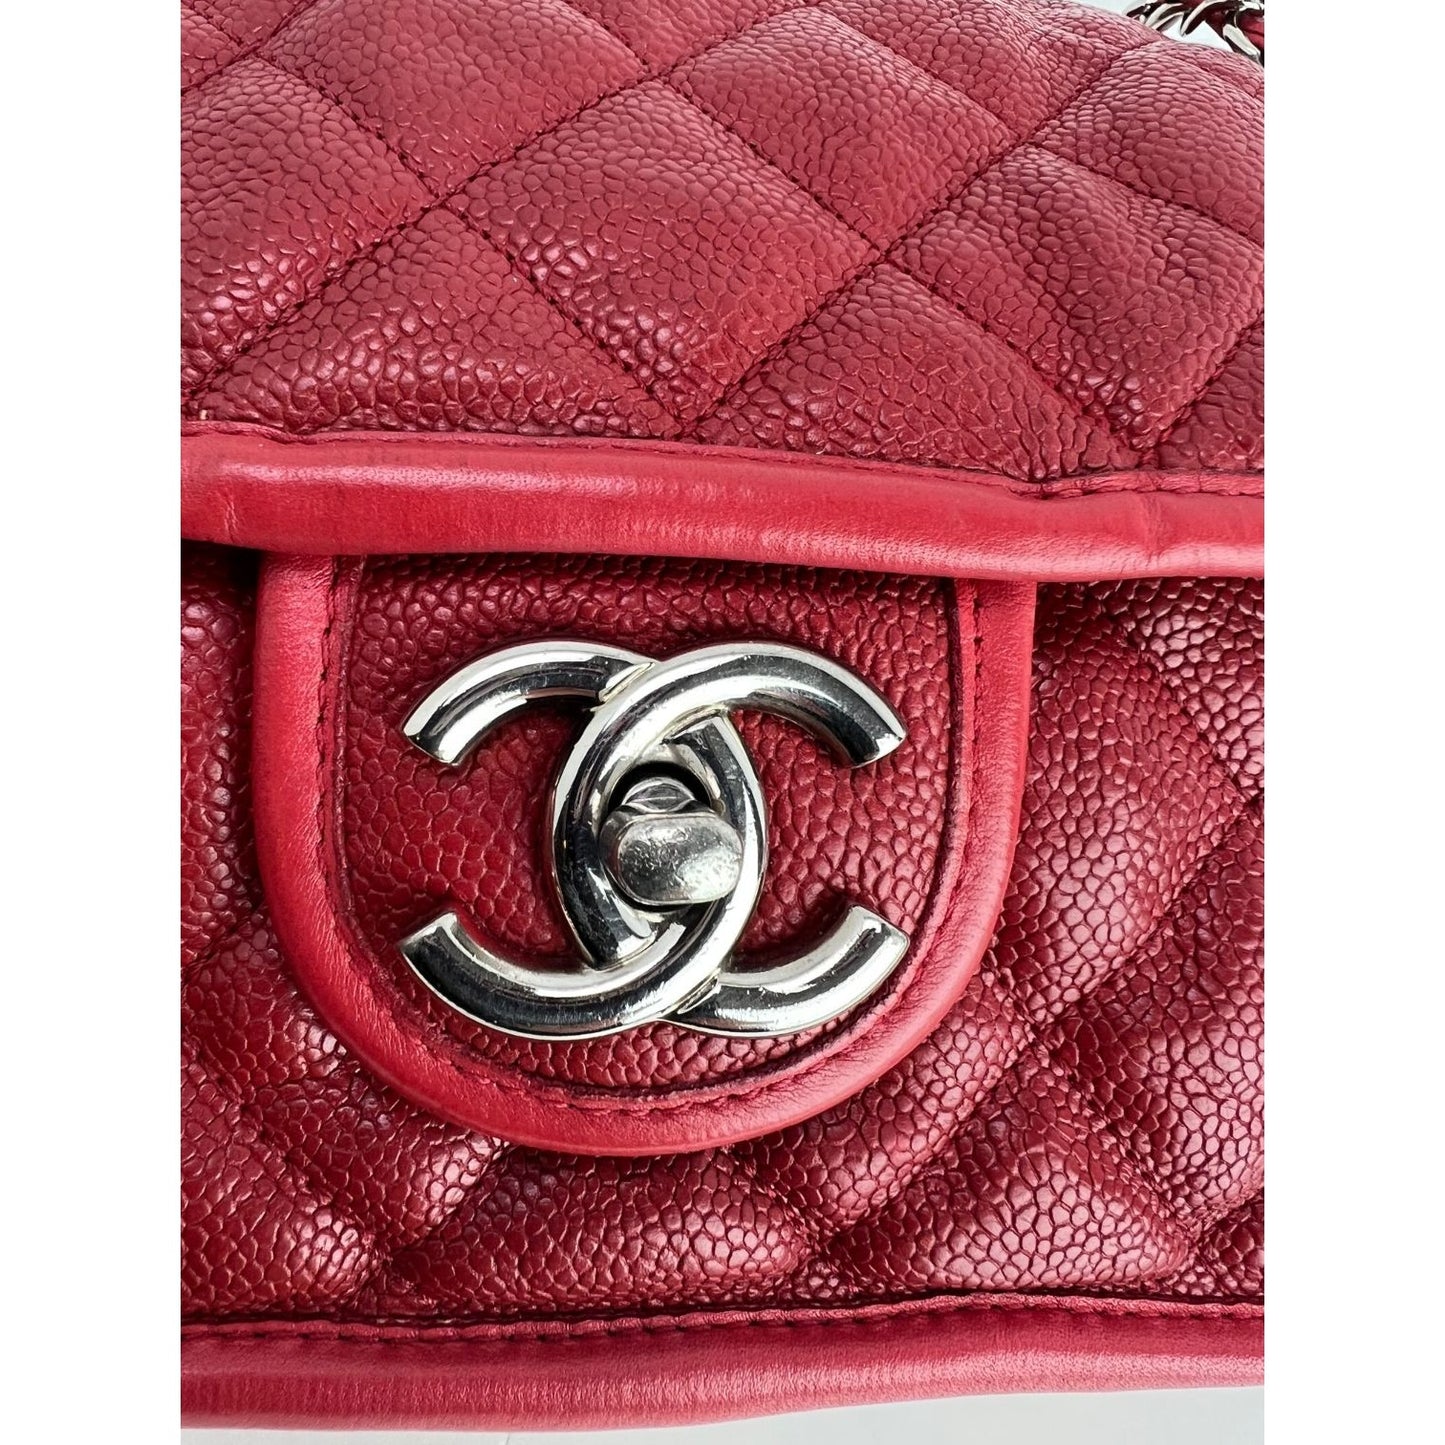 Chanel - Authenticated Cambon Small Rectangle Handbag - Leather Pink For Woman, Very Good condition